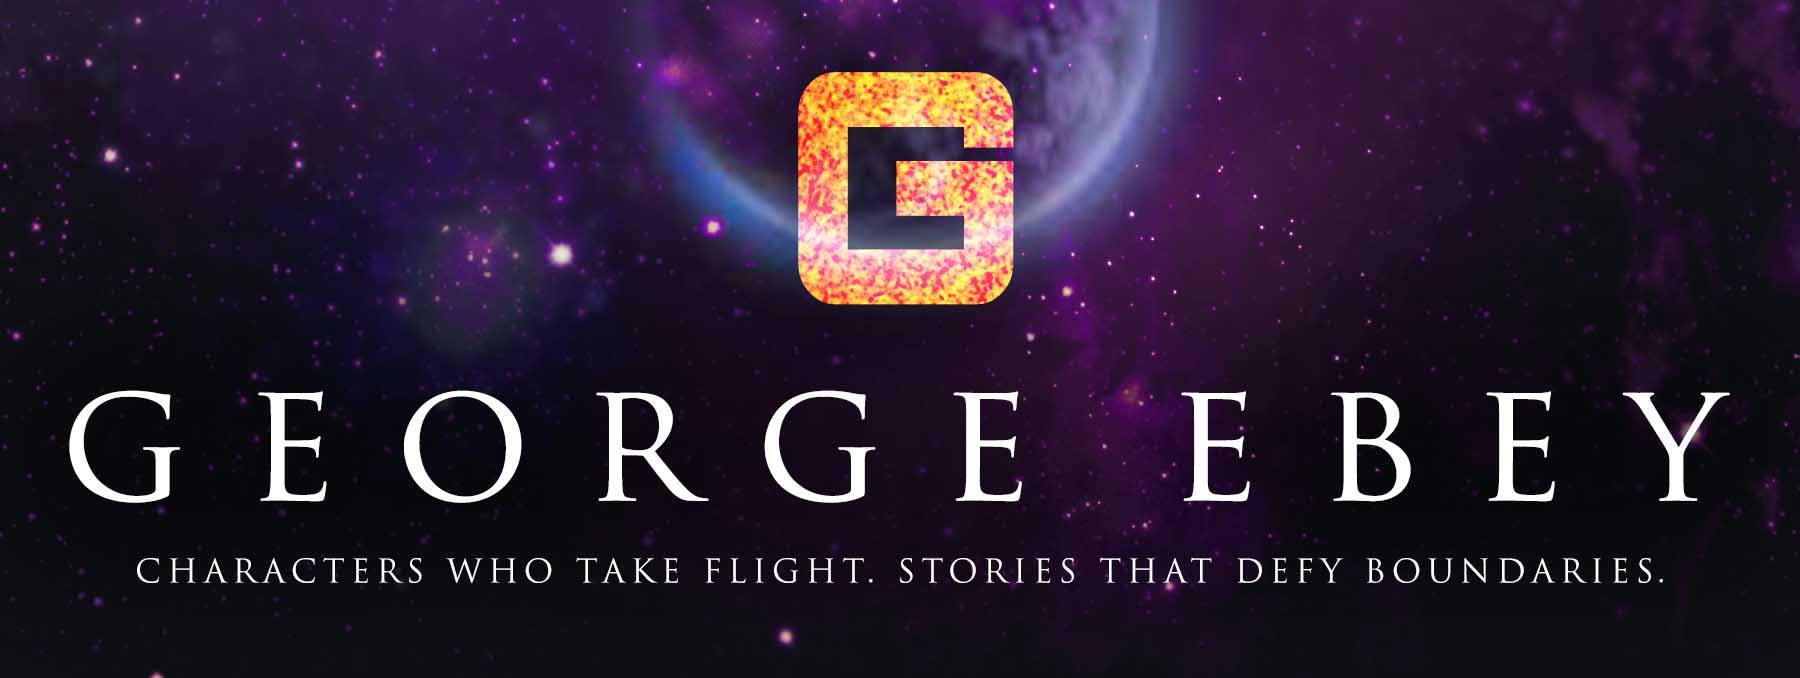 George Ebey Author Page